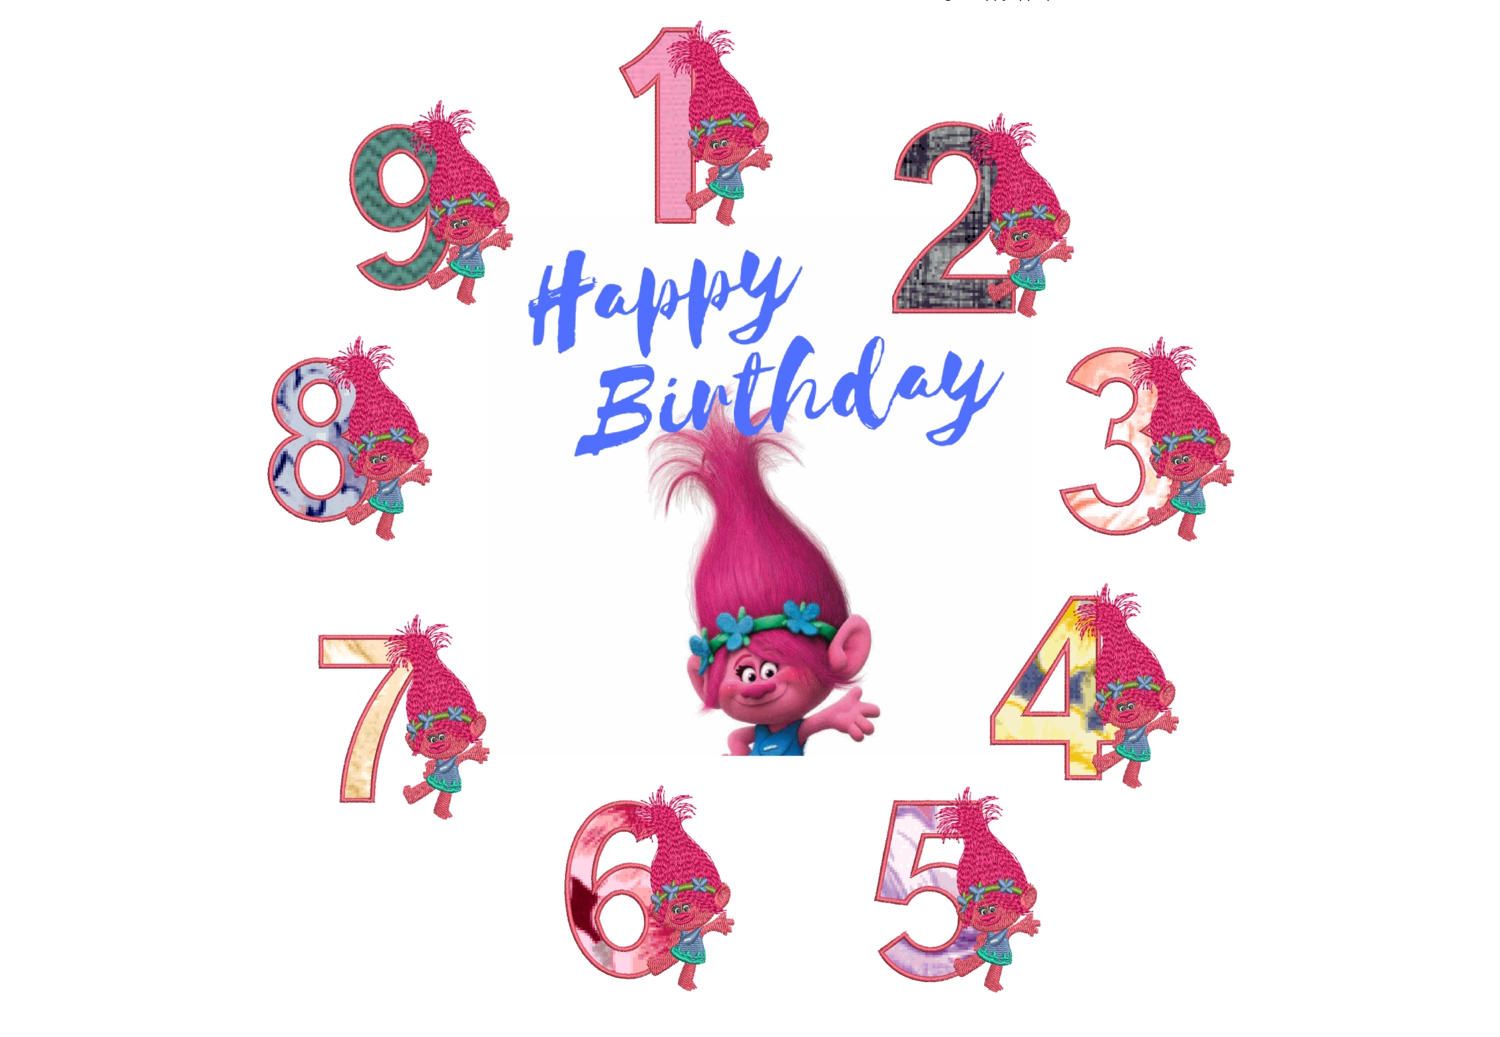 75% off on 5x7in hoop - Princess Poppy from the Movie Trolls - machine embroidery design - Applique Numbers 1 to 9 excellent for birthdays